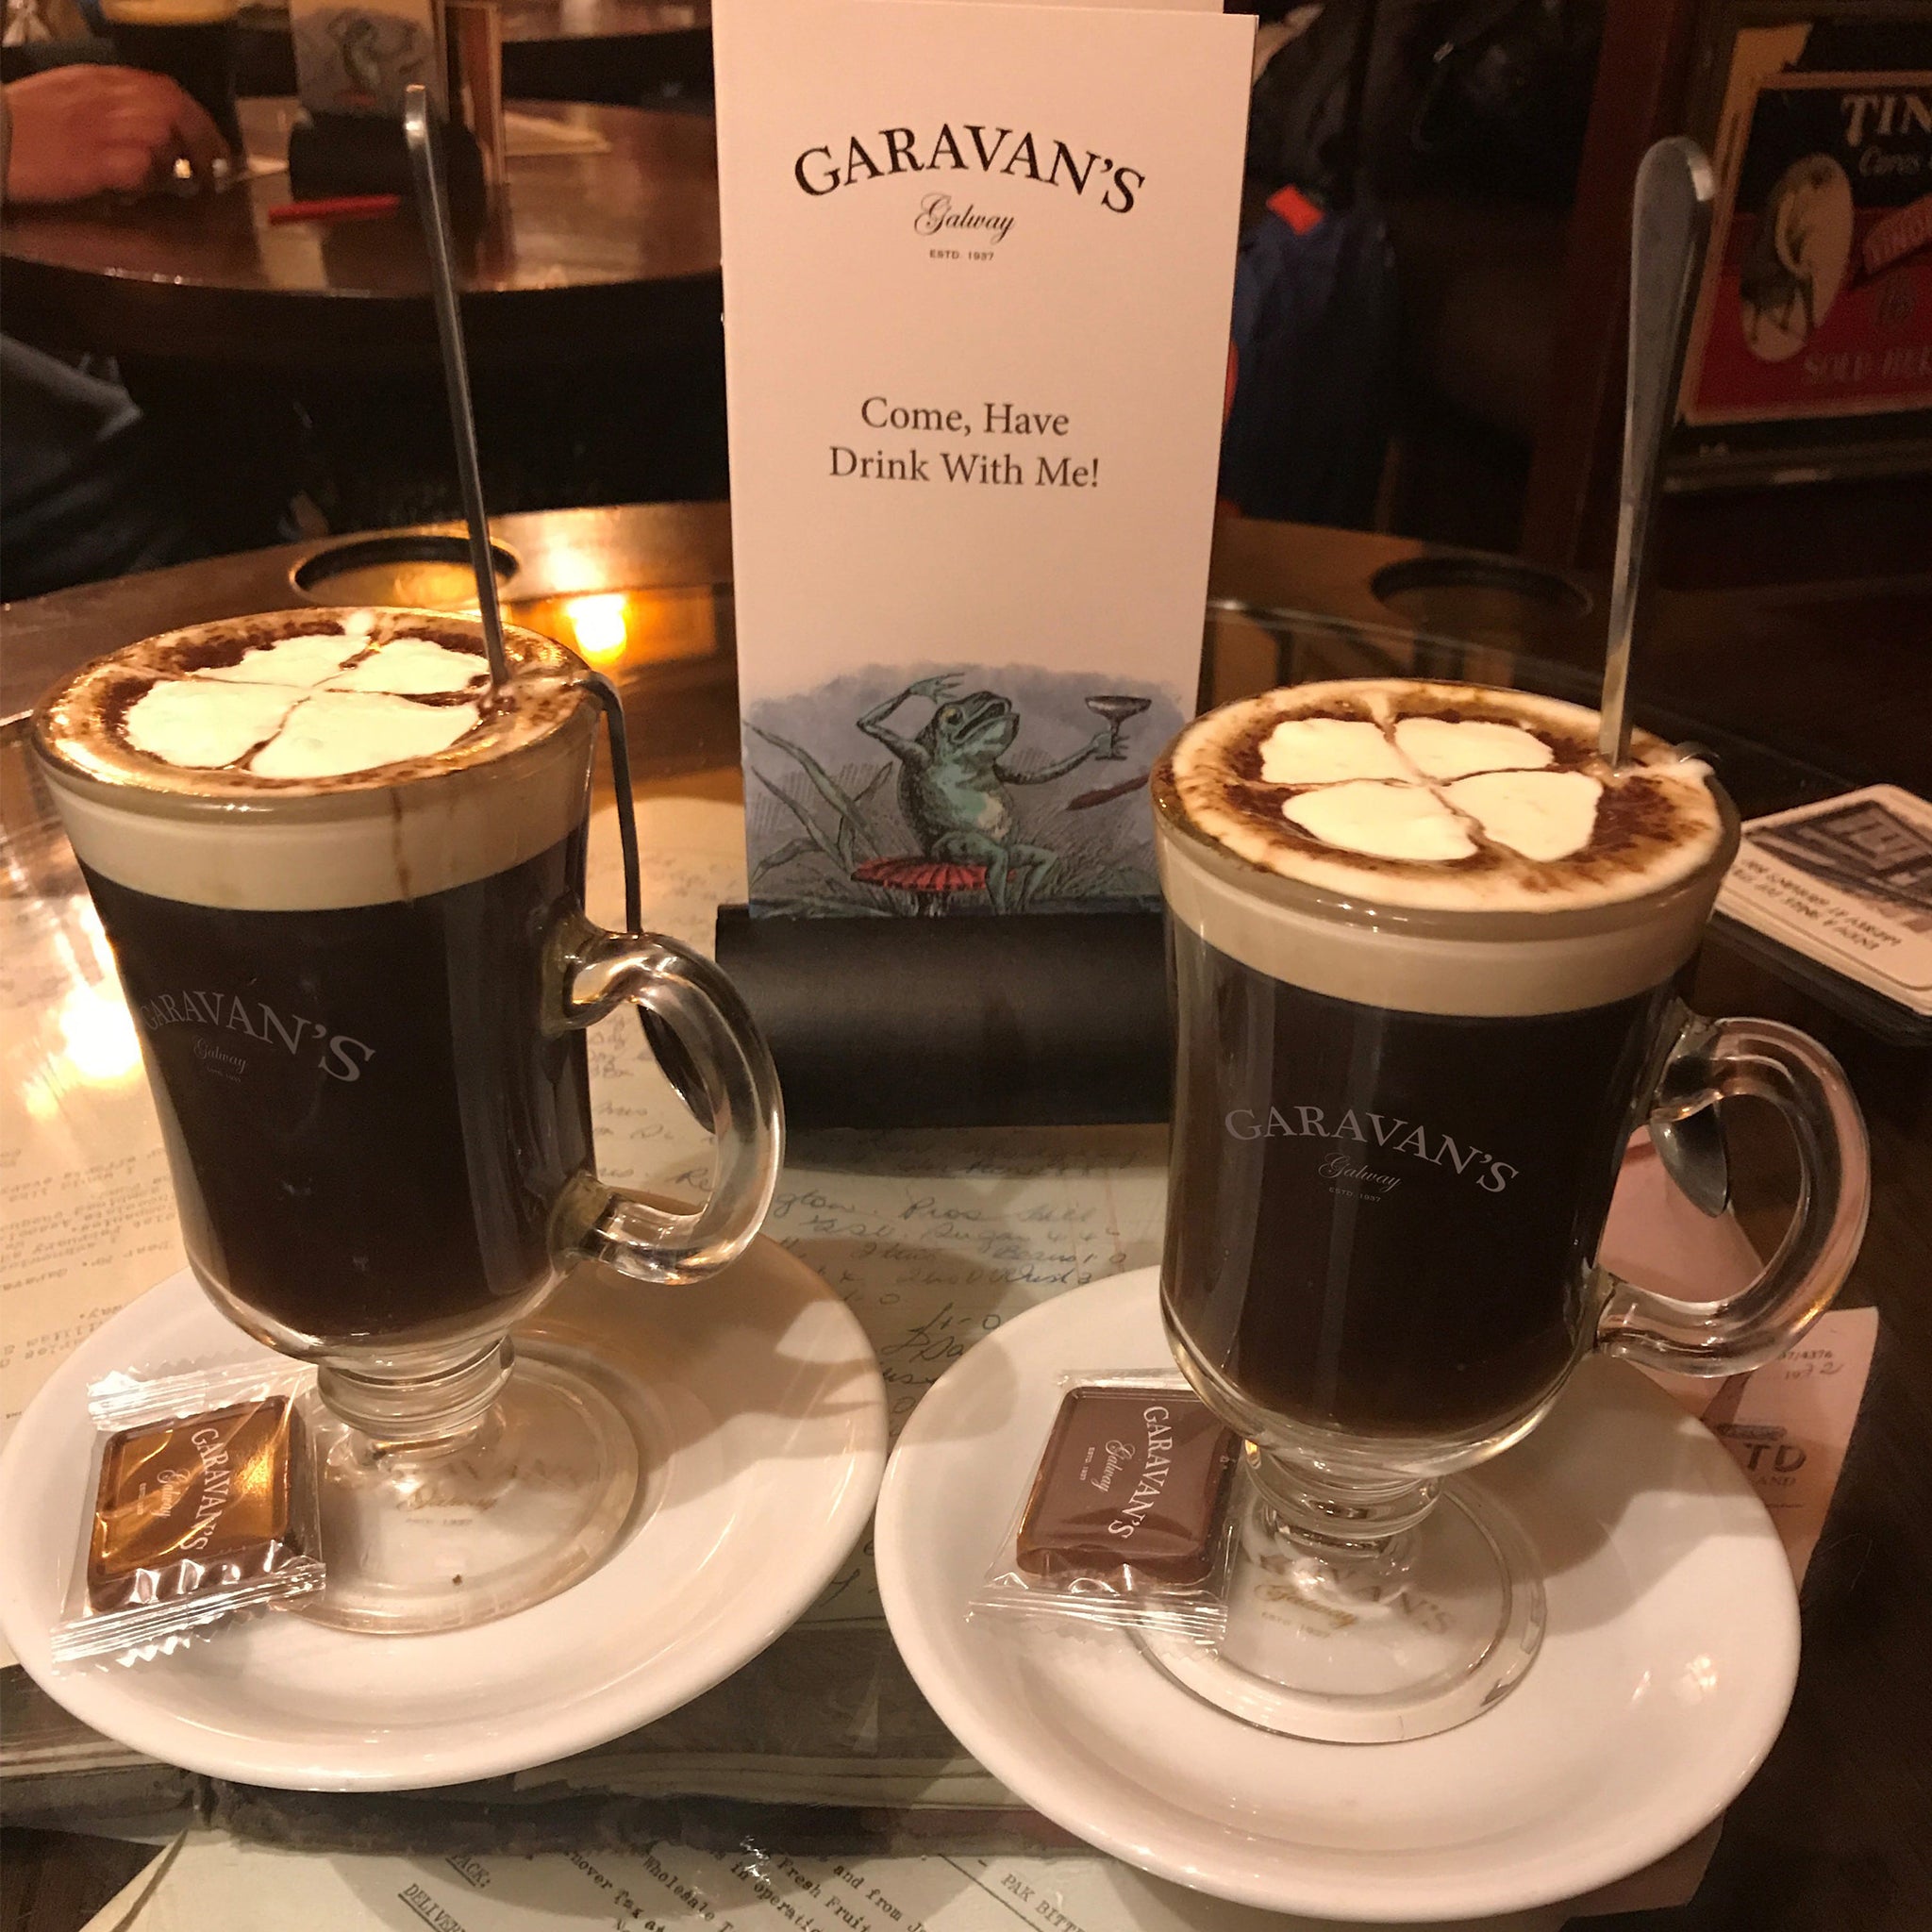 Garavan’s Irish Coffee Glass - Handcrafted for the Perfect Irish Coffee Experience - Authentic Gift for Coffee Enthusiasts - Exclusively Available Here